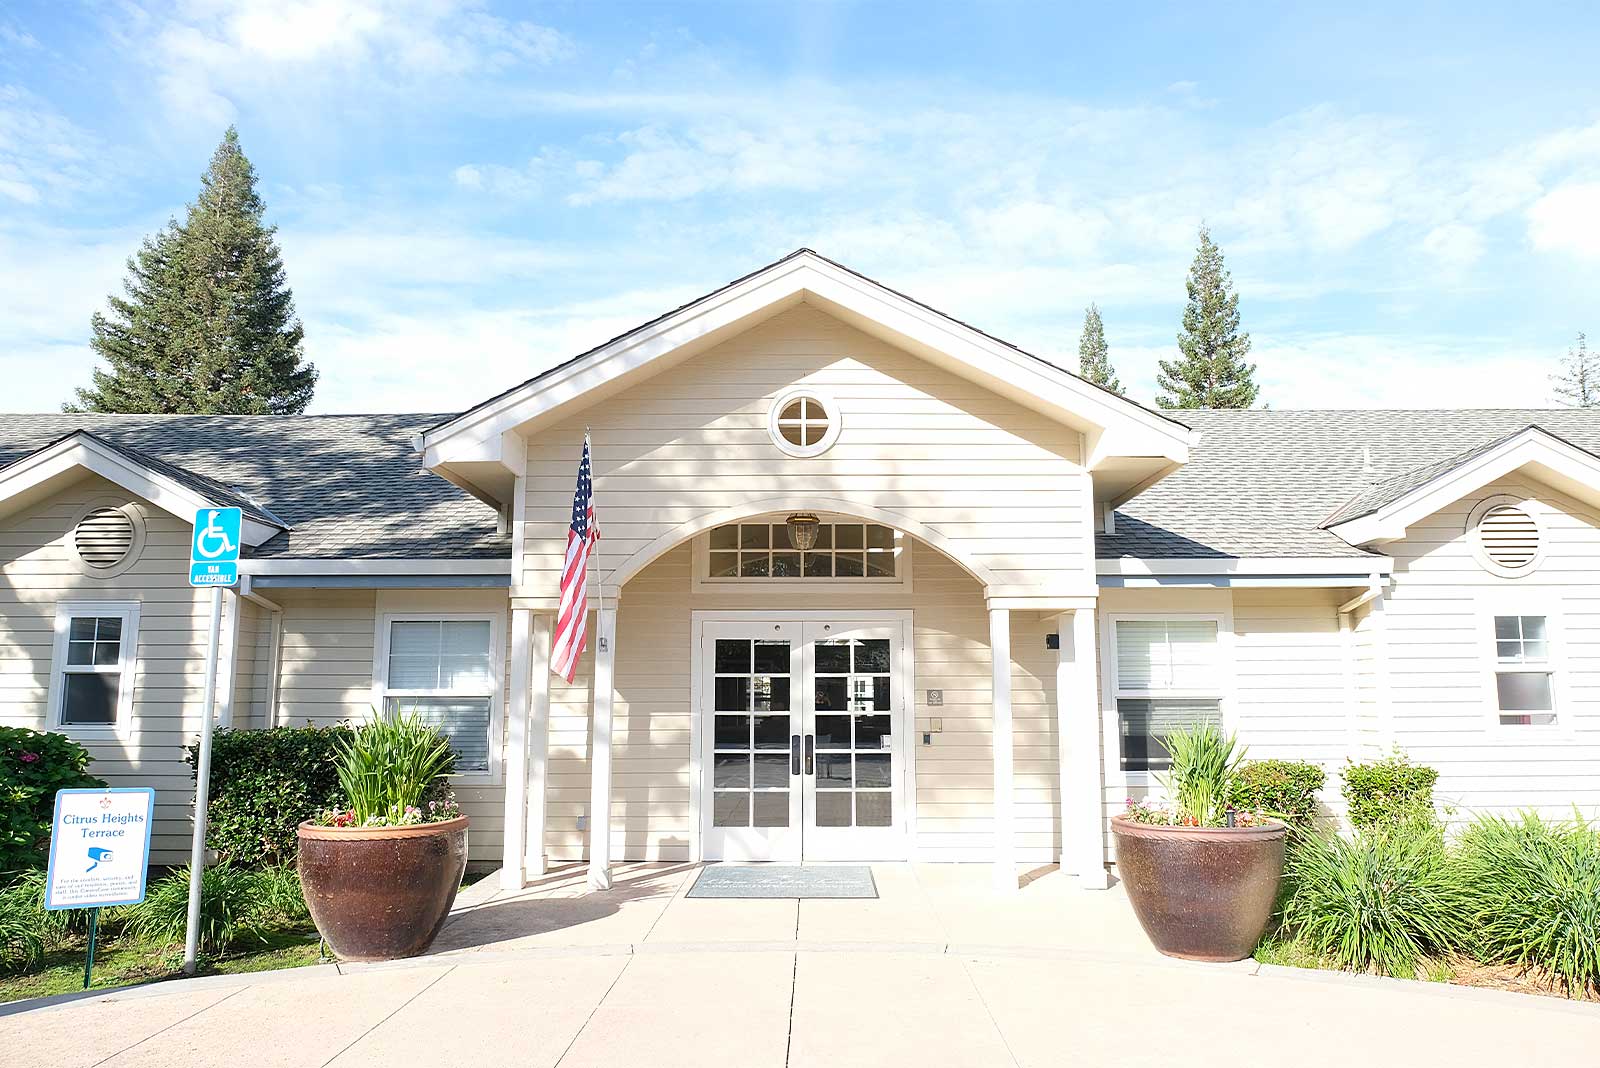 Senior Living in the Heart of Citrus Heights